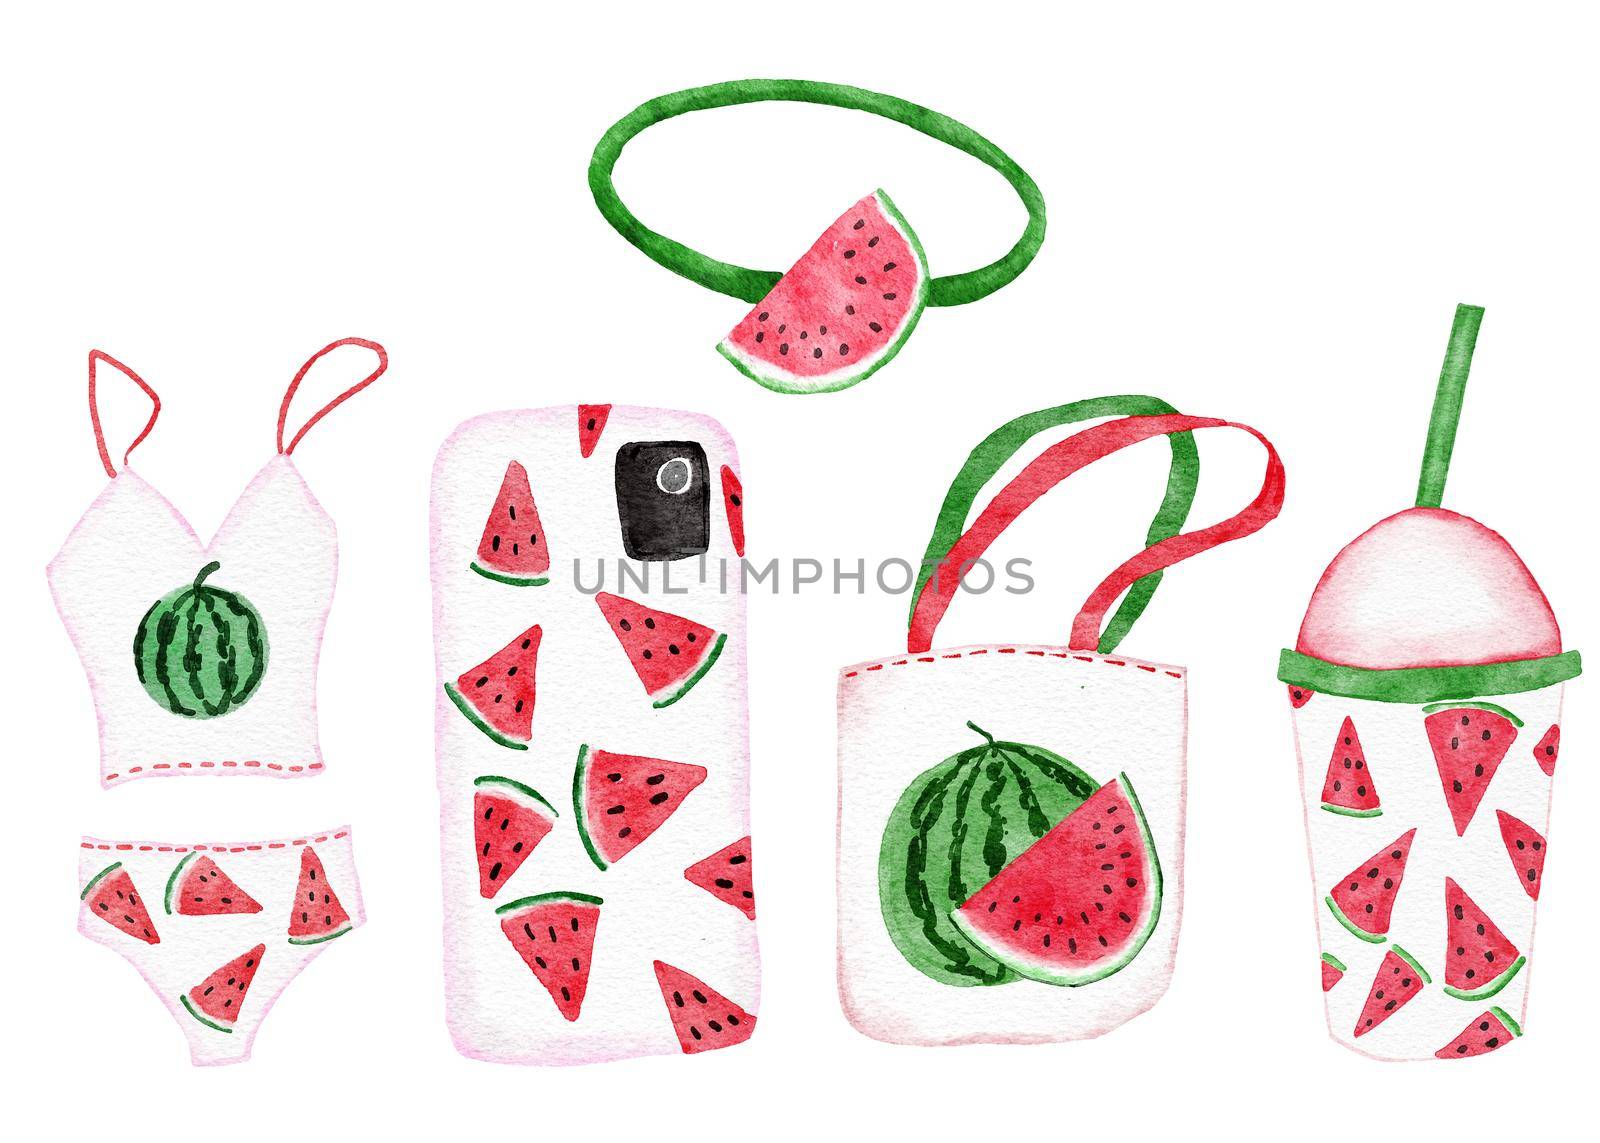 Watercolor hand drawn objects with watermelon summer print, red green swimsuit swimwear, funner phone case, tote bag, tumbler. Girly fashion for holiday vacation design. Bright cute kawaii print. by Lagmar